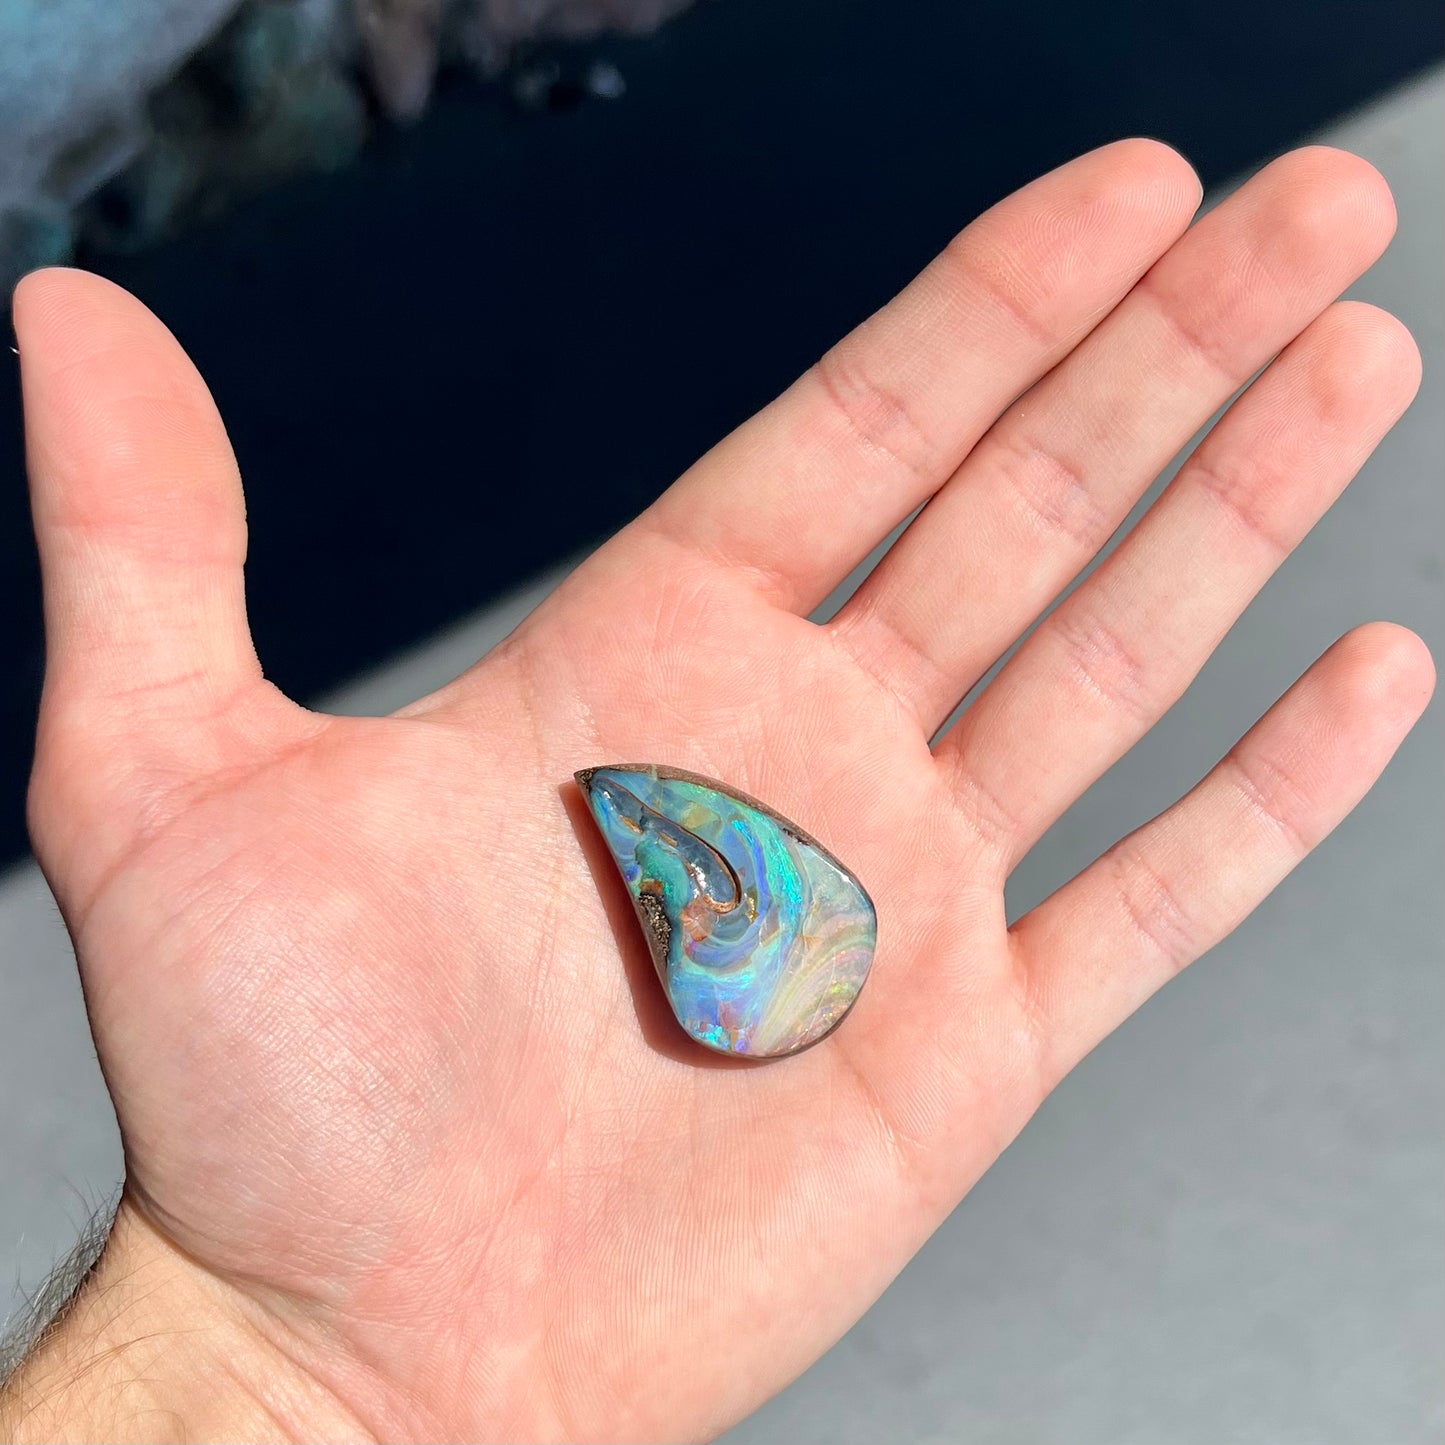 A polished pear shaped boulder opal stone from Quilpie, Australia.  Predominant colors are blue, green, and aqua.